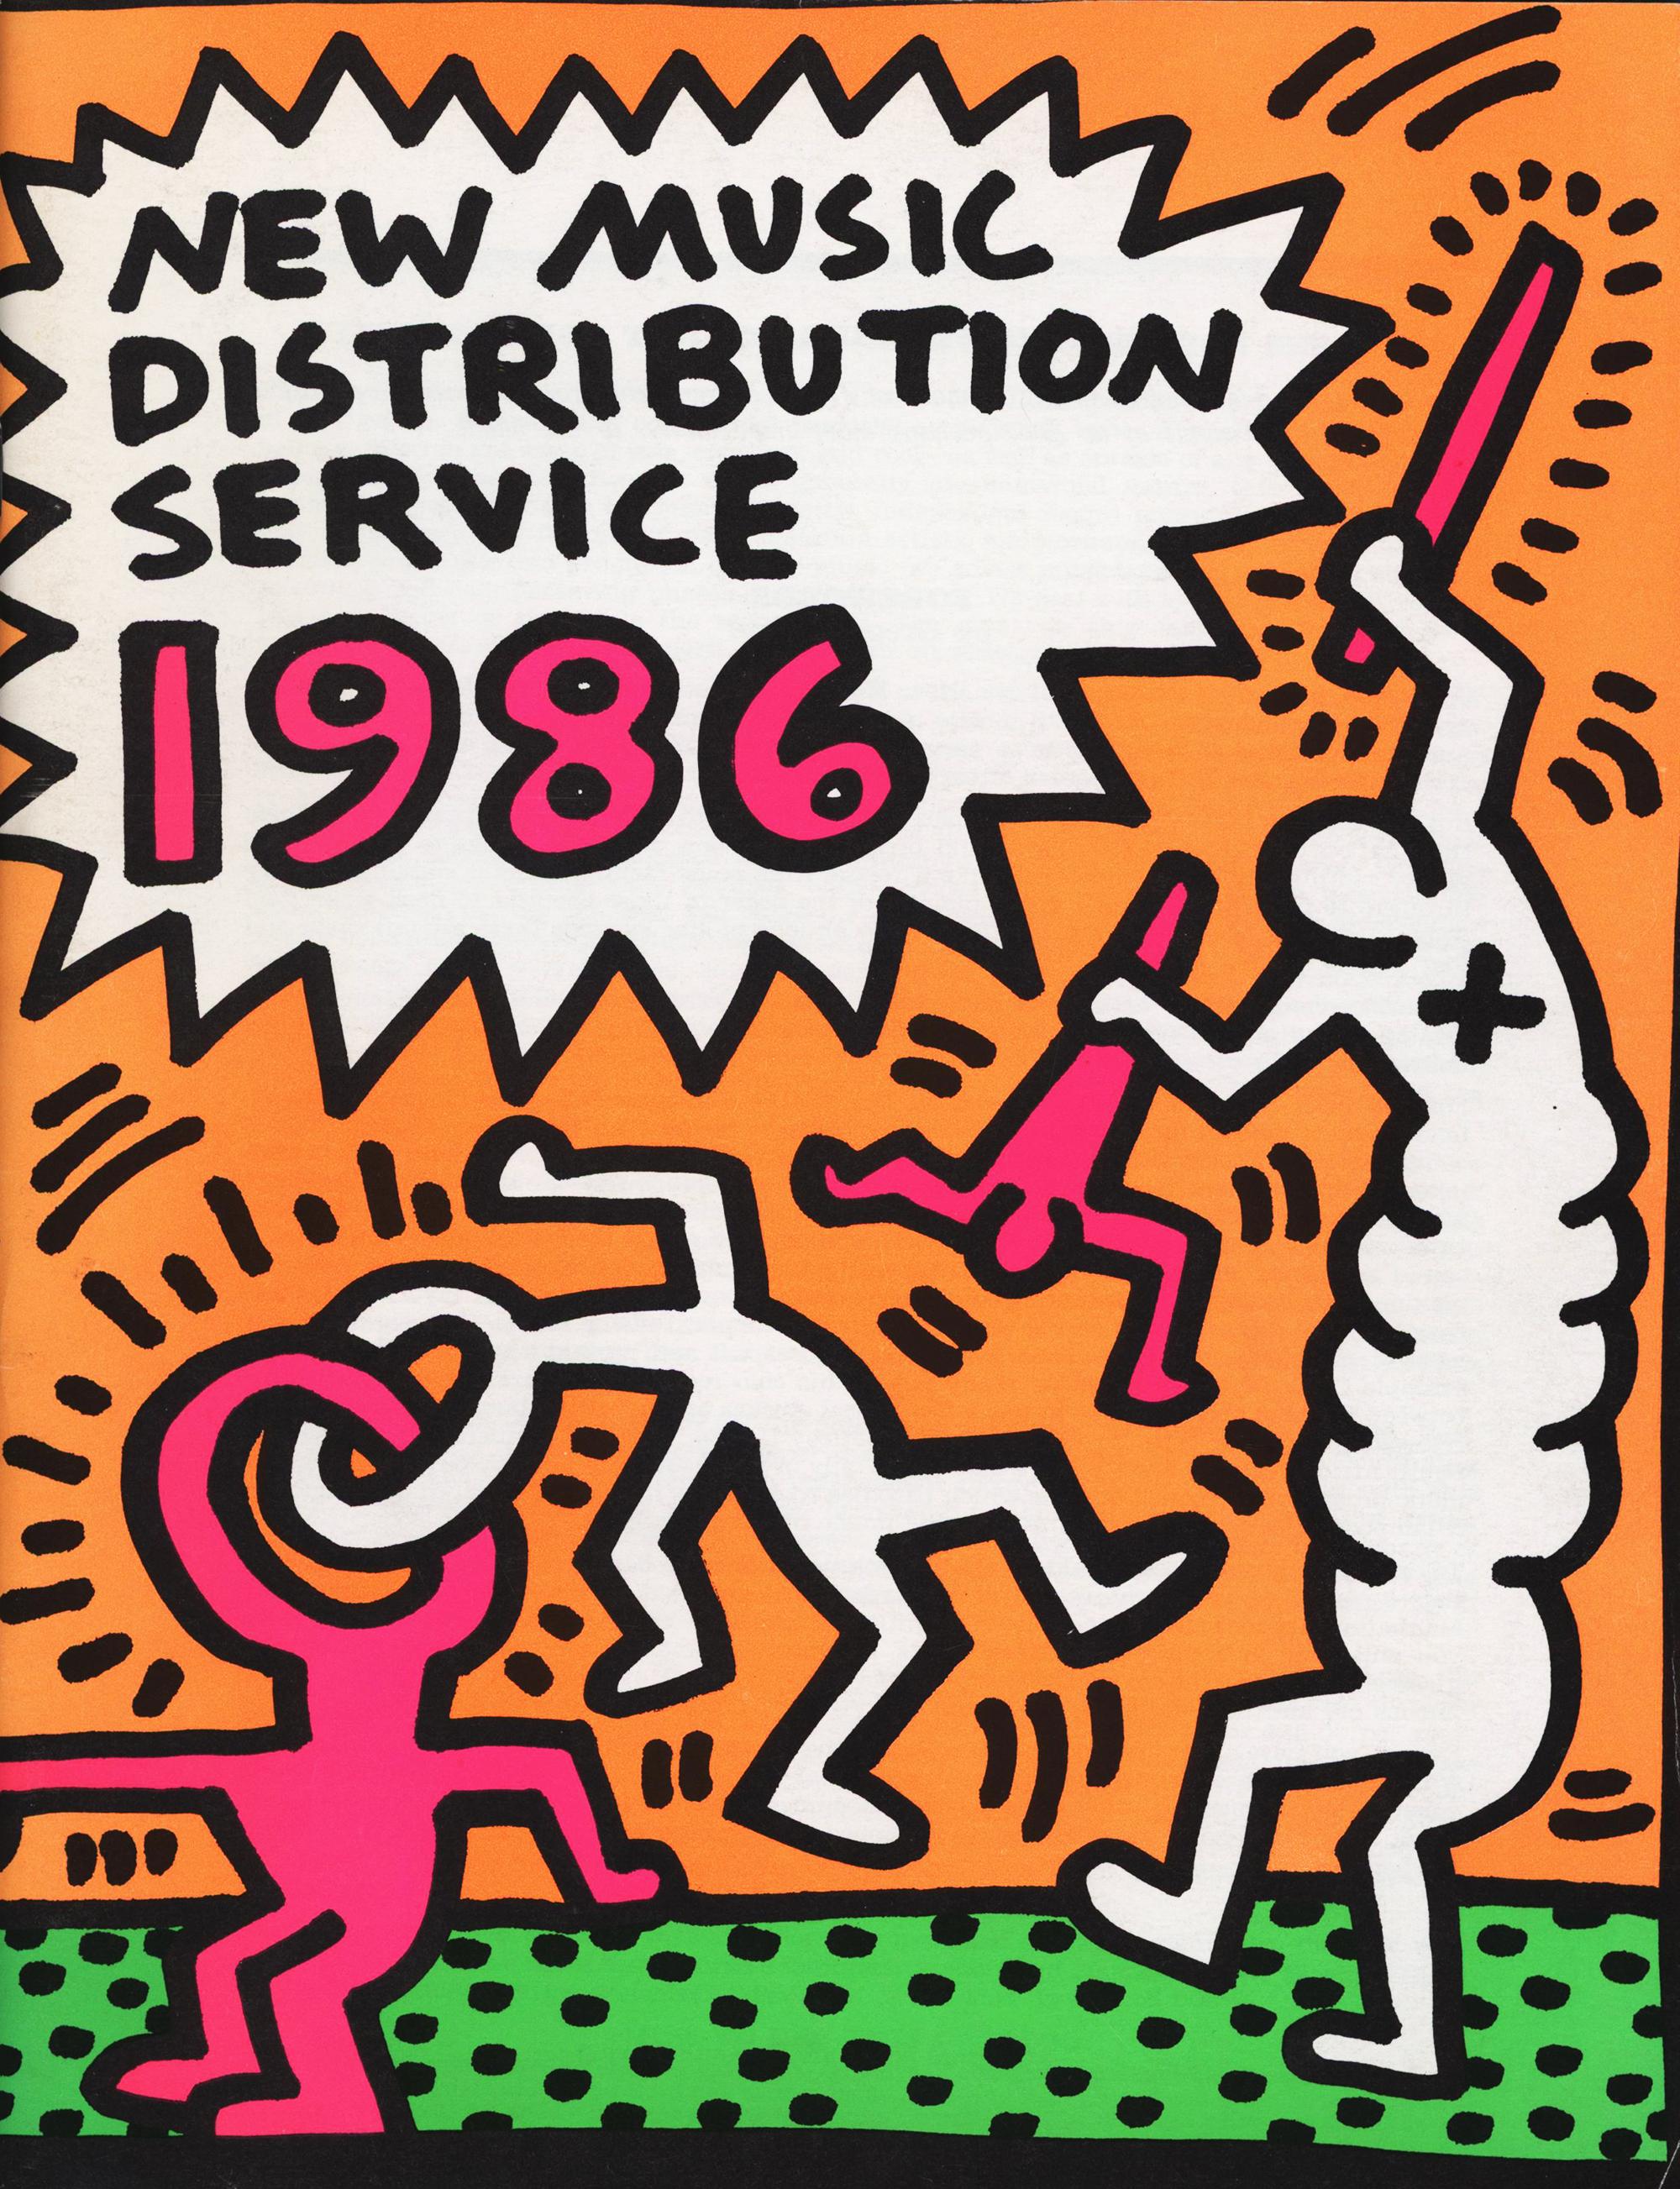 Keith Haring illustated New Music Distribution Service 1986